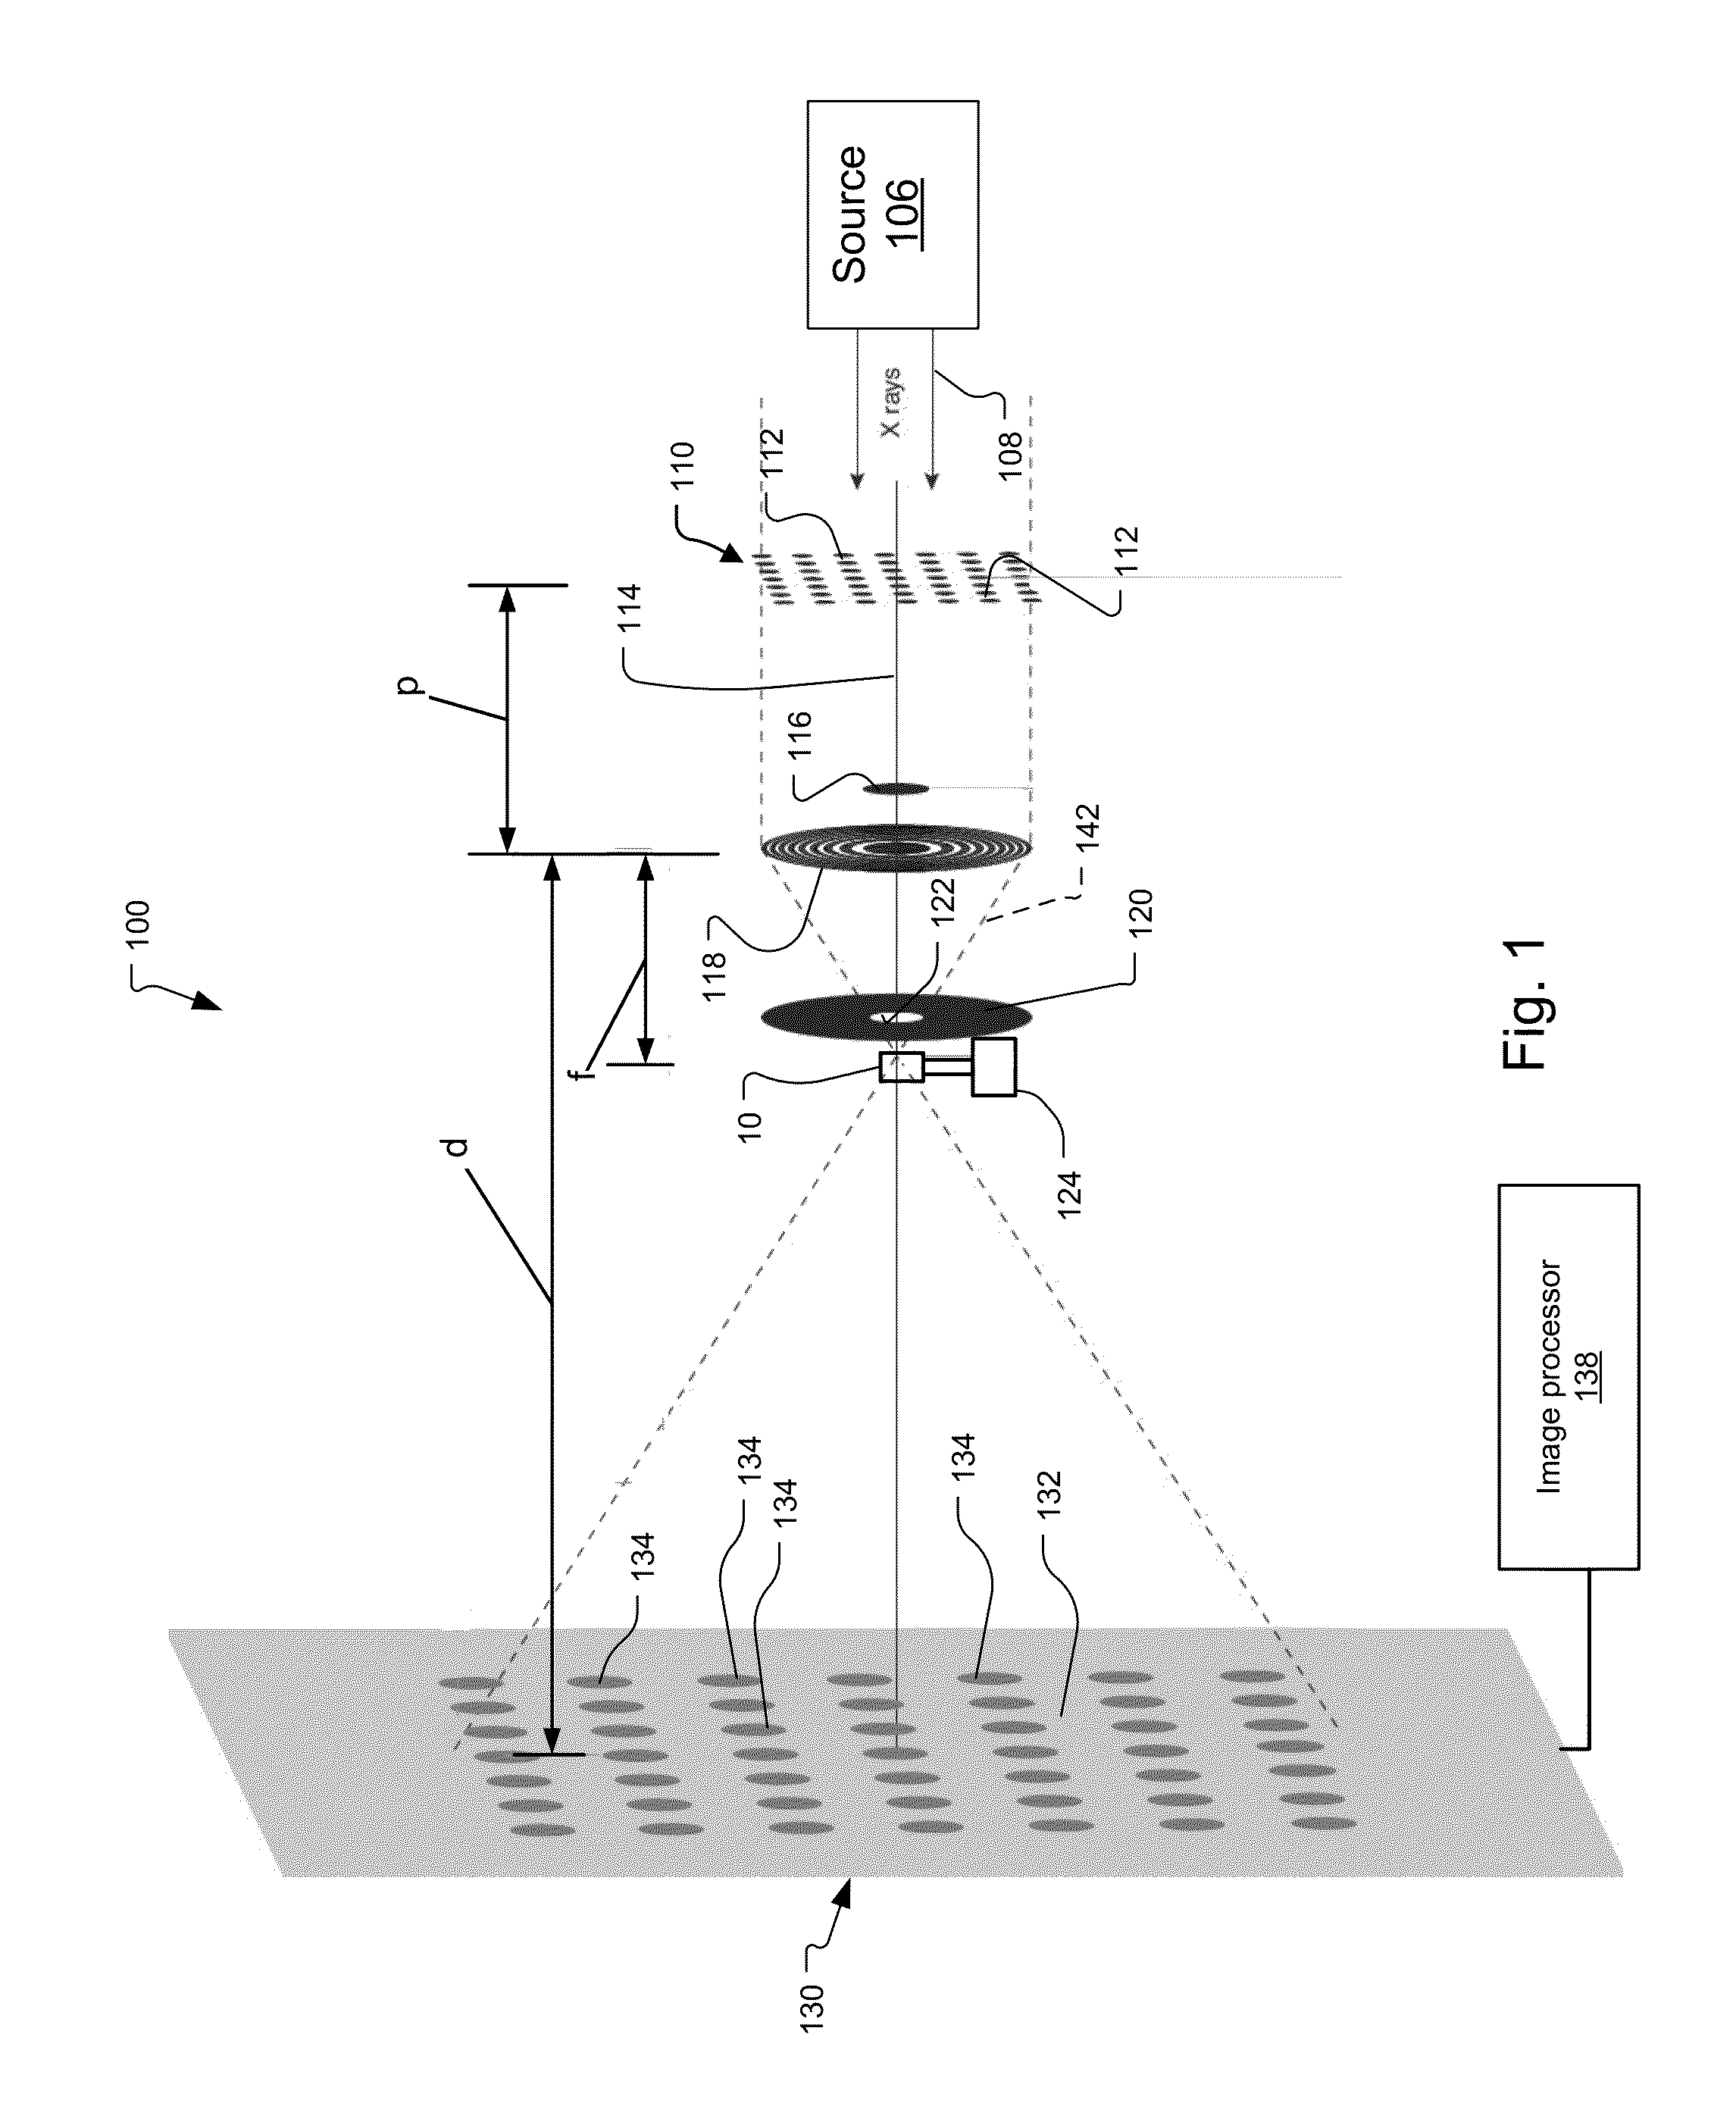 Phase Contrast Imaging Using Patterned Illumination/Detector and Phase Mask